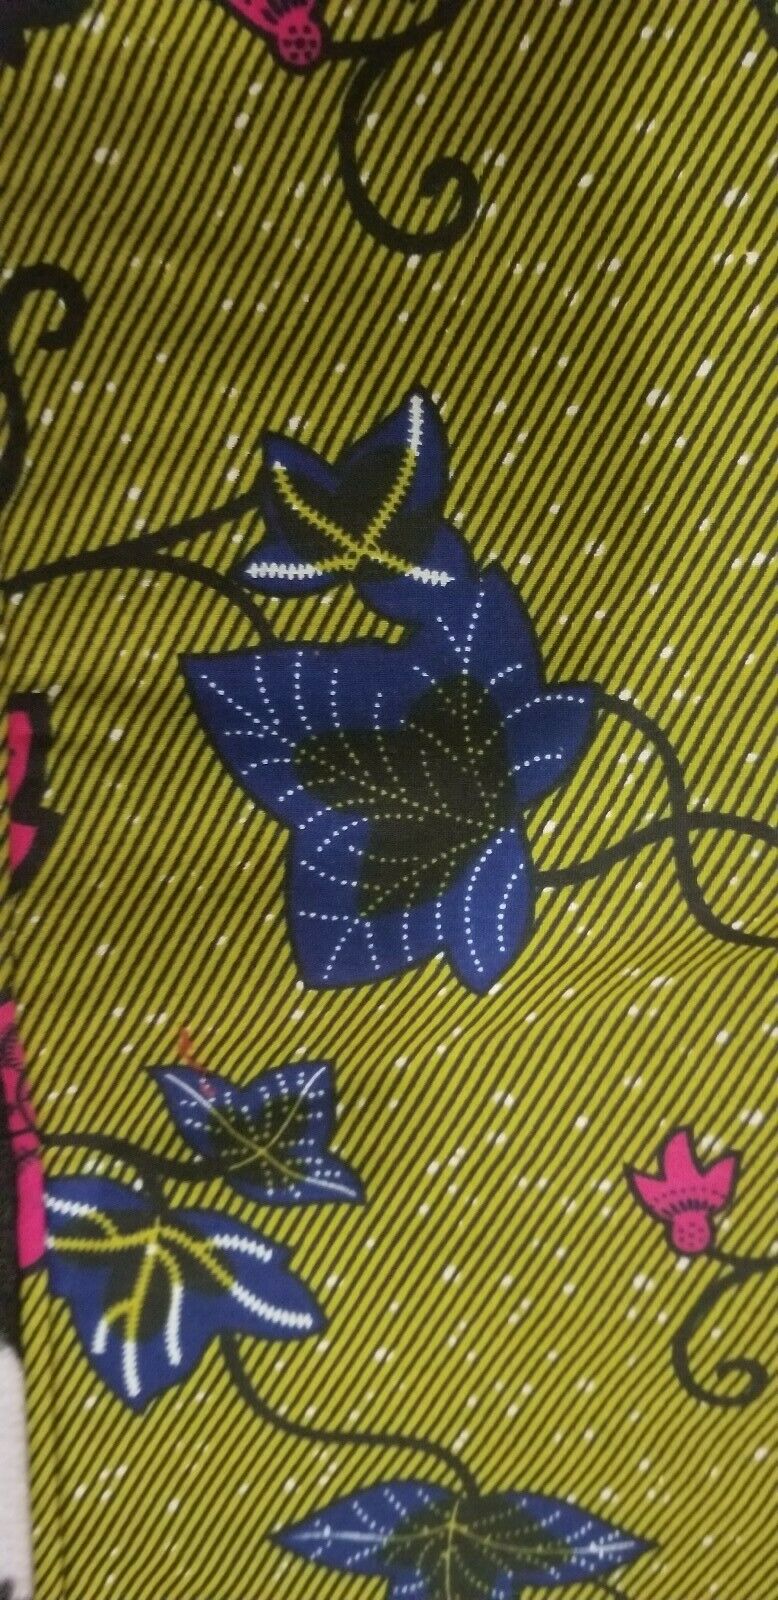 MULTICOLOR African Wax Print 100% Cotton Fabric 3yrds ×(44 in.) ~$16.25